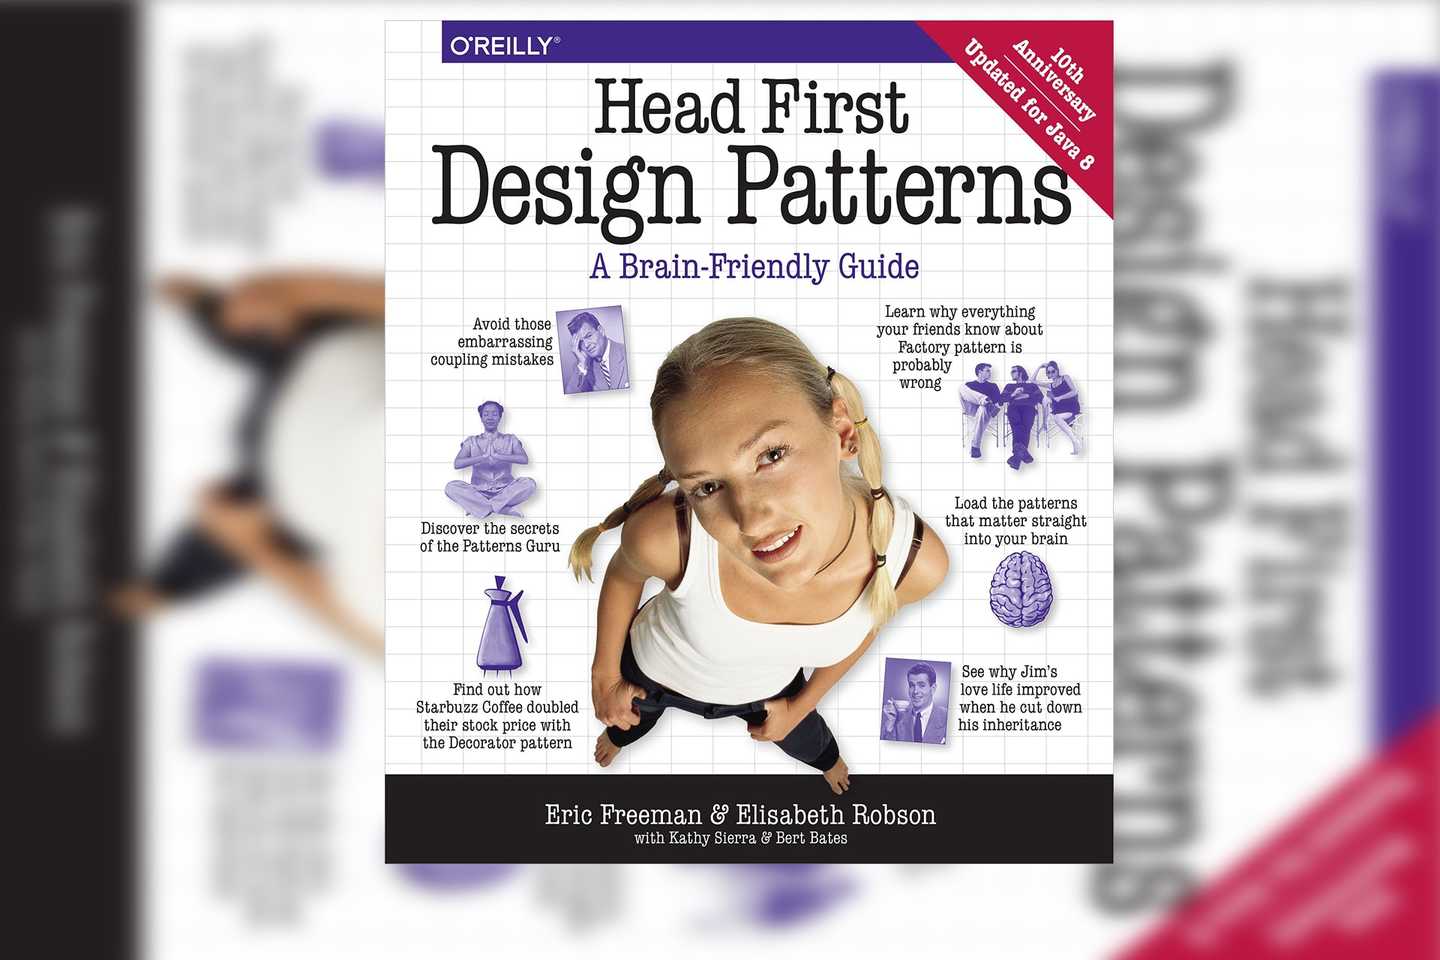 [Head First Design Patterns] 데코레이터 패턴(Decorator Pattern) cover image